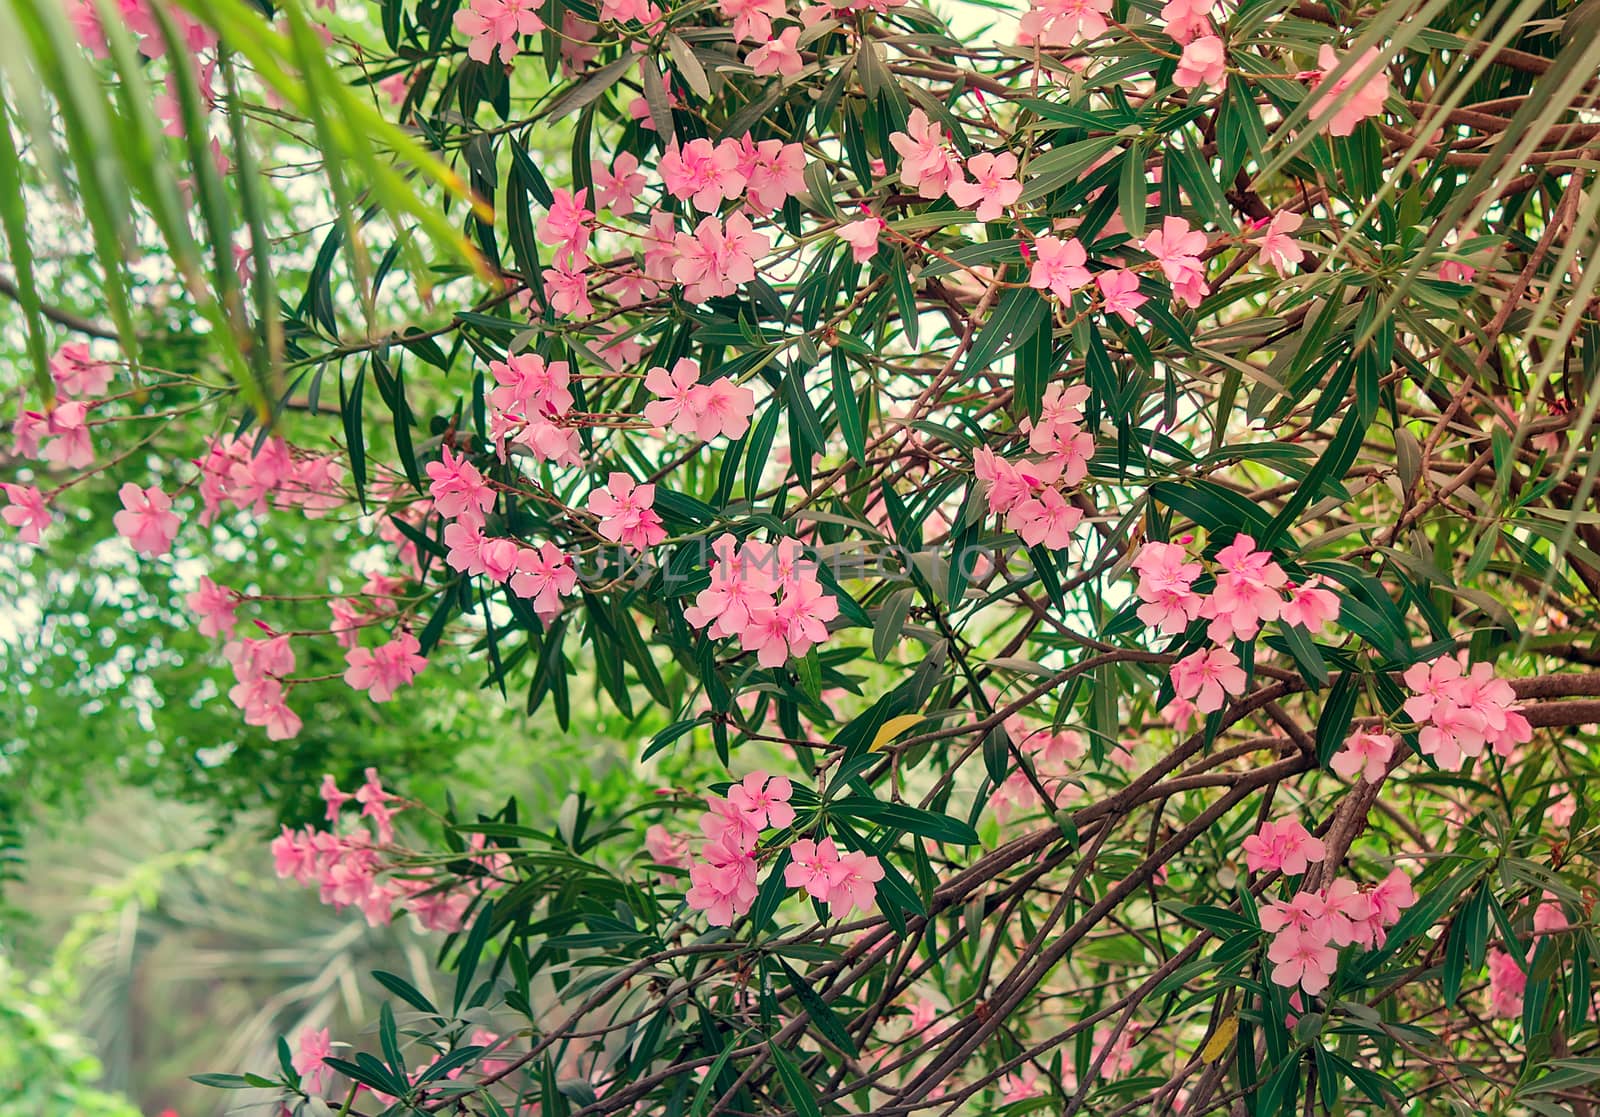 Blooming oleander with a large number of beautiful delicate pink flowers and green leaves lit by the sun.